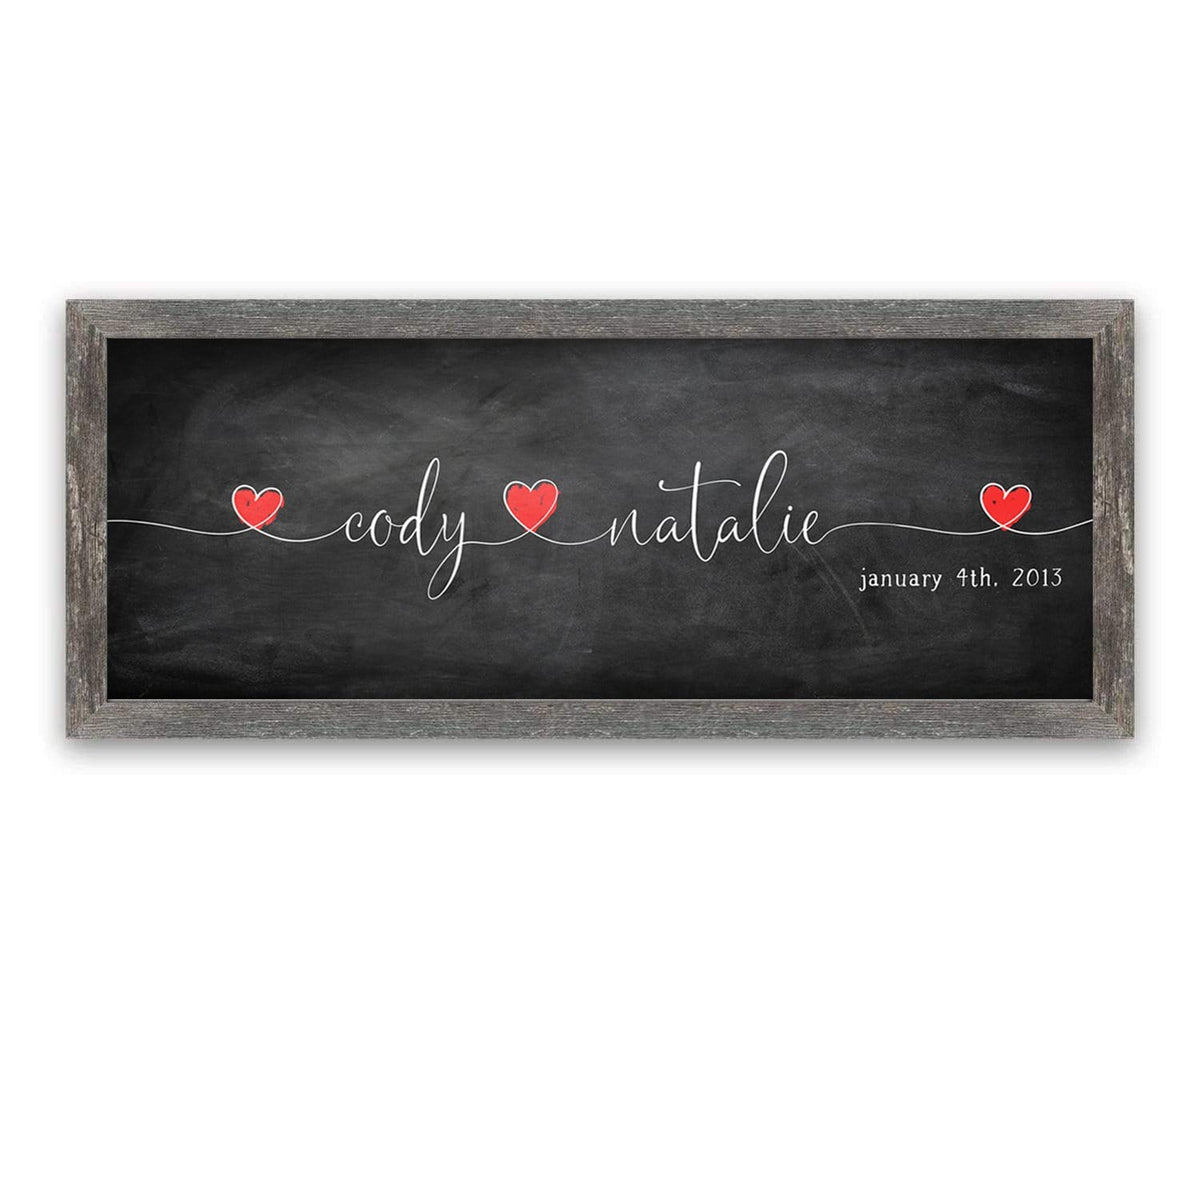 Personalized Love Intertwined romantic art decor including yours and your partner&#39;s names and date - Framed Canvas option in grey barnwood frame style